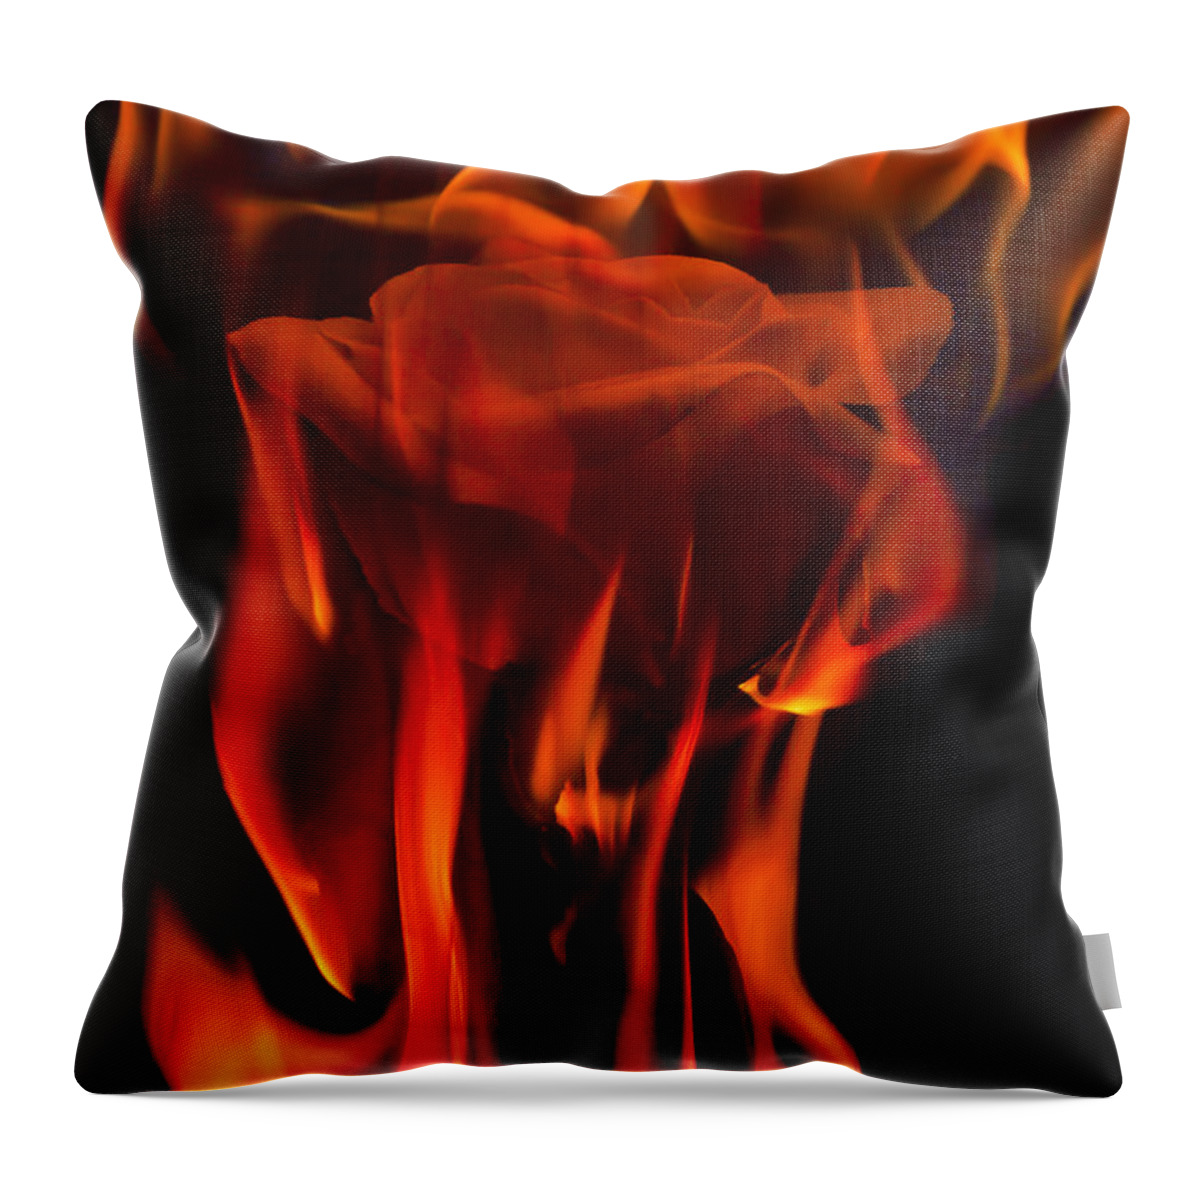 Abstract Throw Pillow featuring the photograph Flaming Rose by Jon Glaser